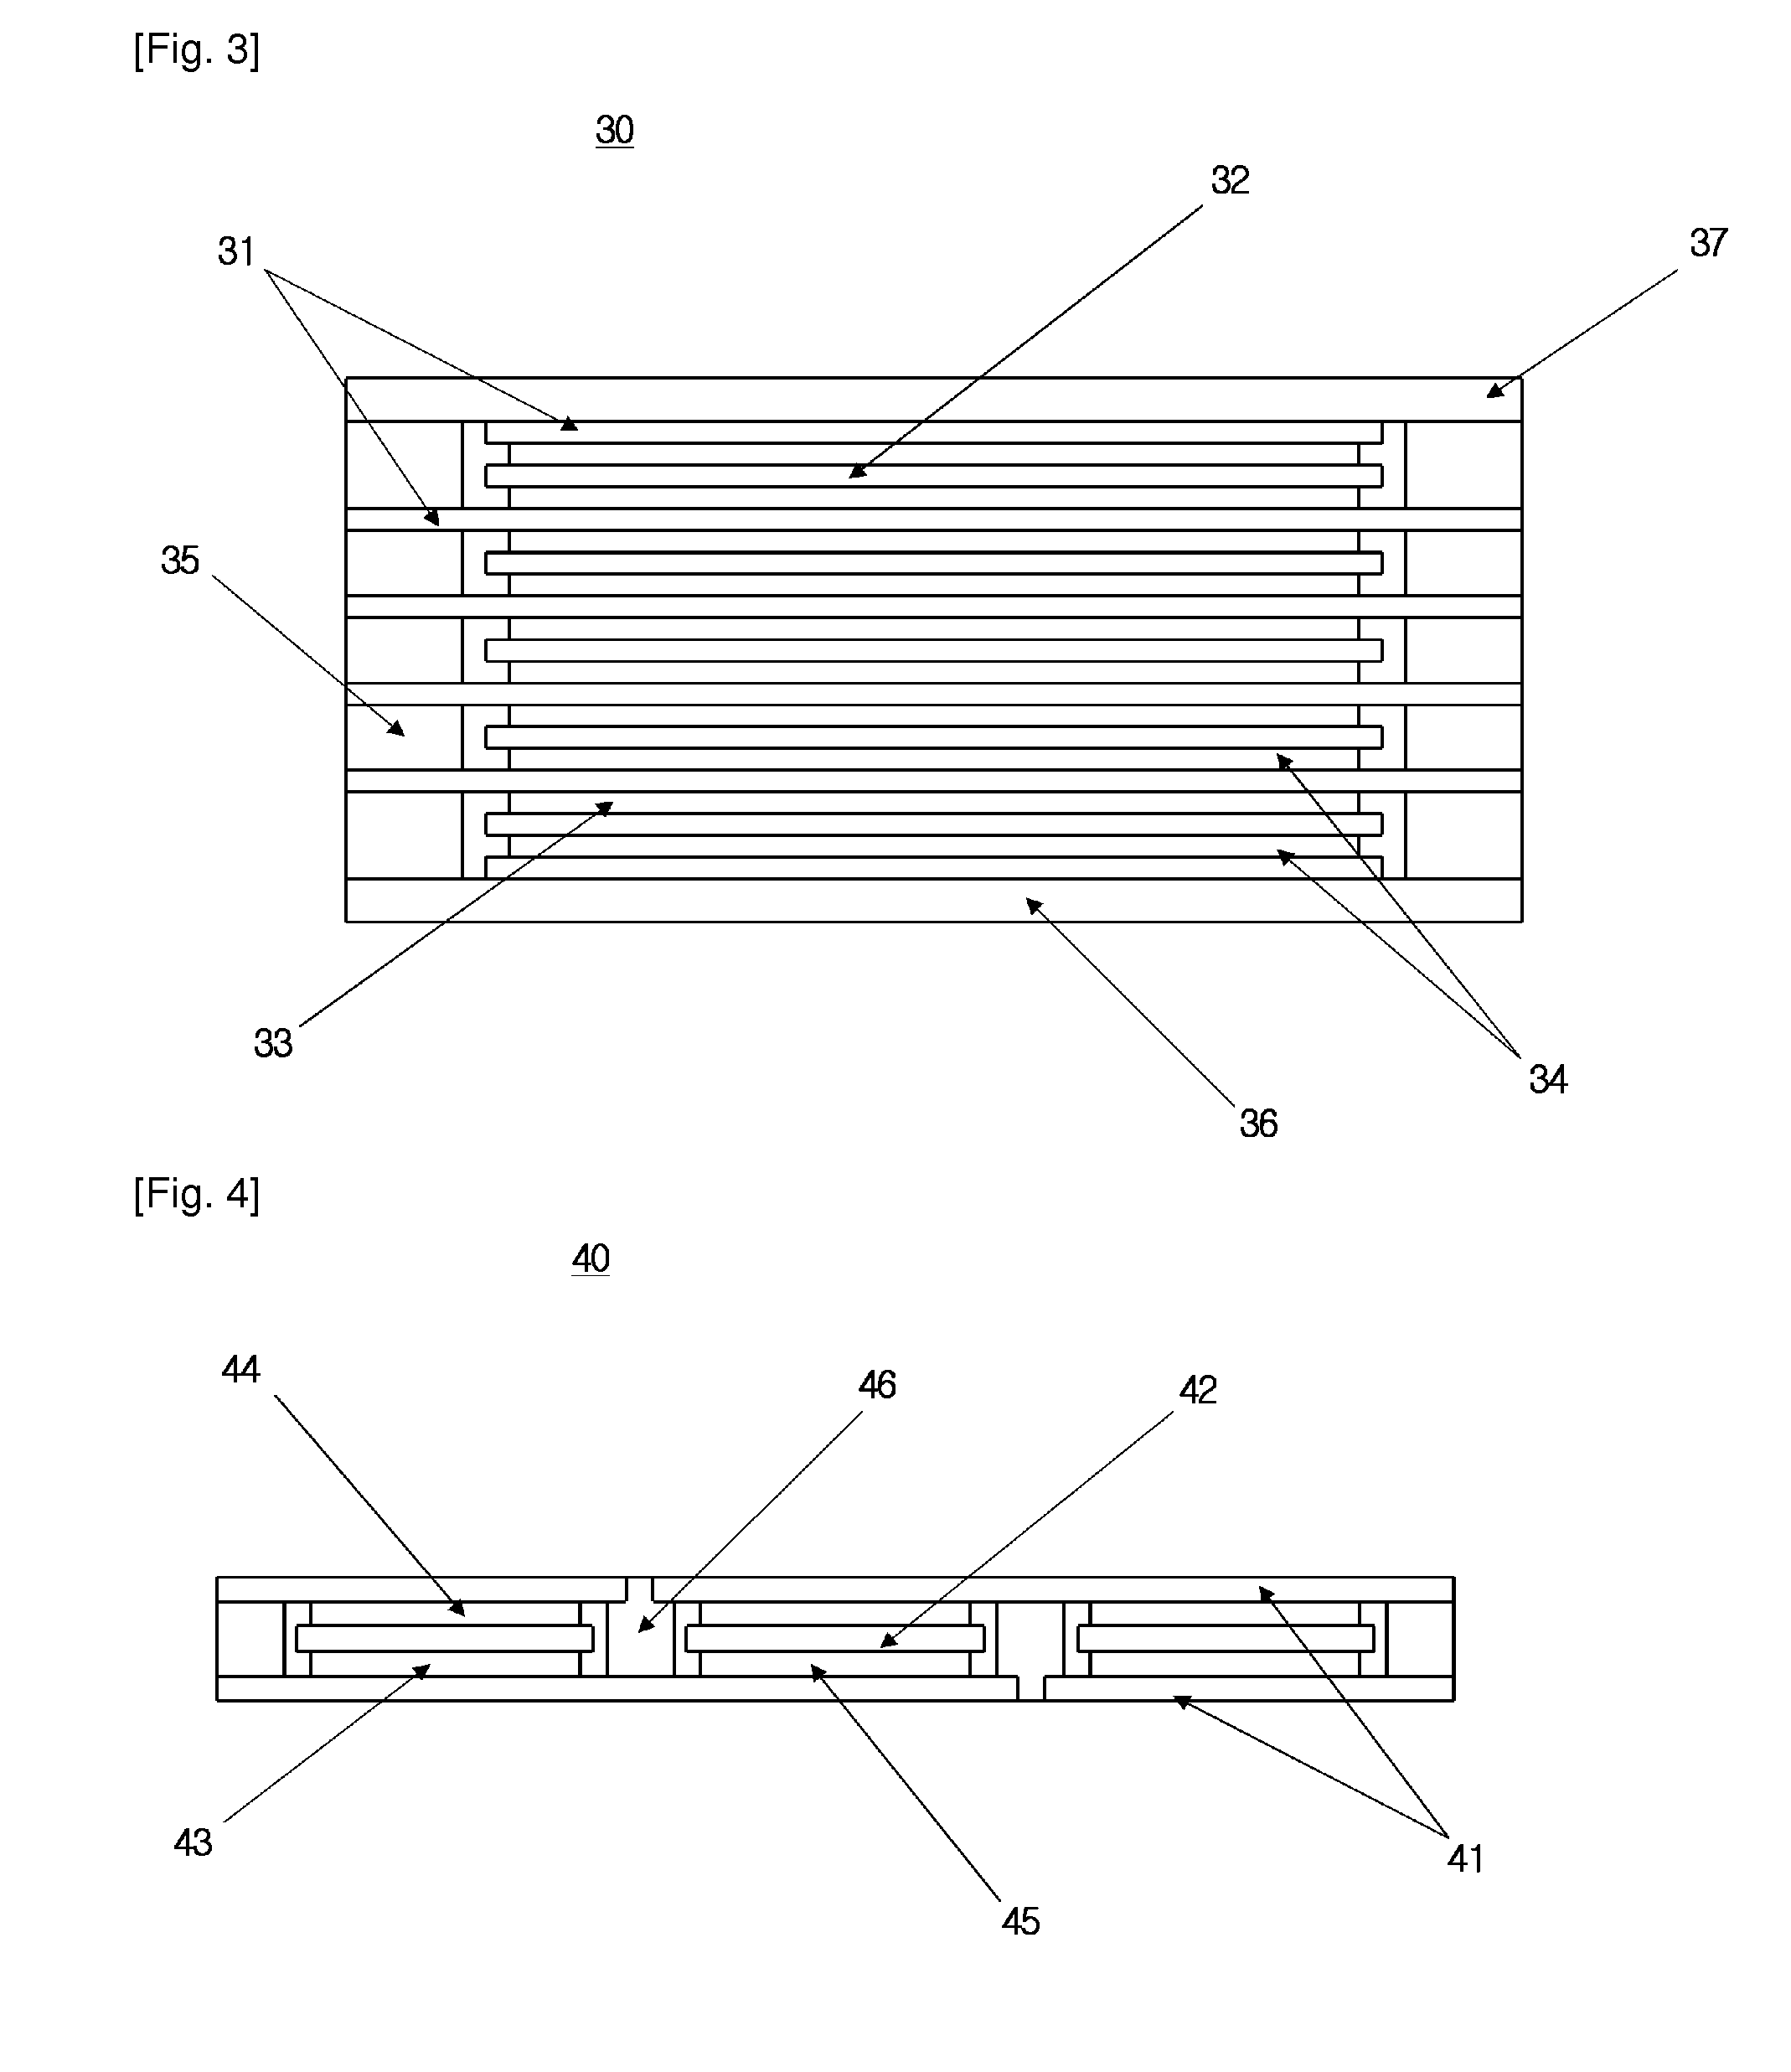 Electrochemical cell having quasi-bipolar structure